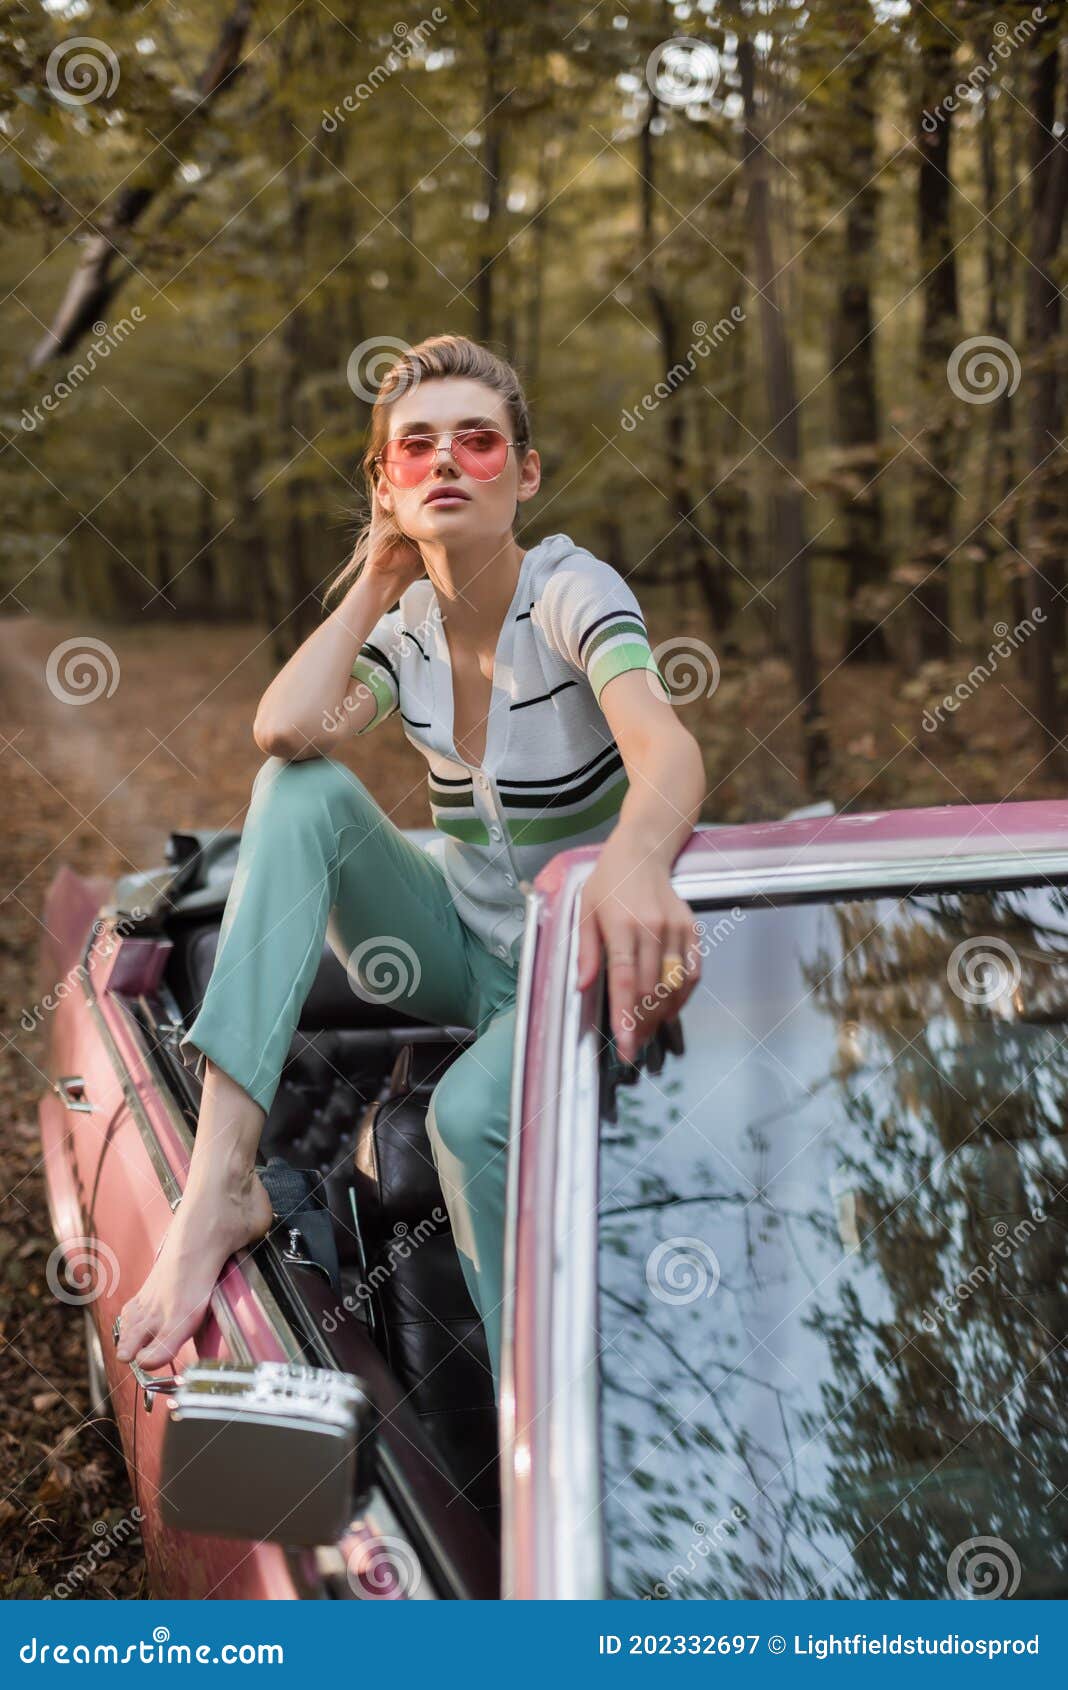 https://thumbs.dreamstime.com/z/barefoot-woman-sunglasses-holding-hand-behind-head-posing-cabriolet-blurred-foreground-stylish-202332697.jpg